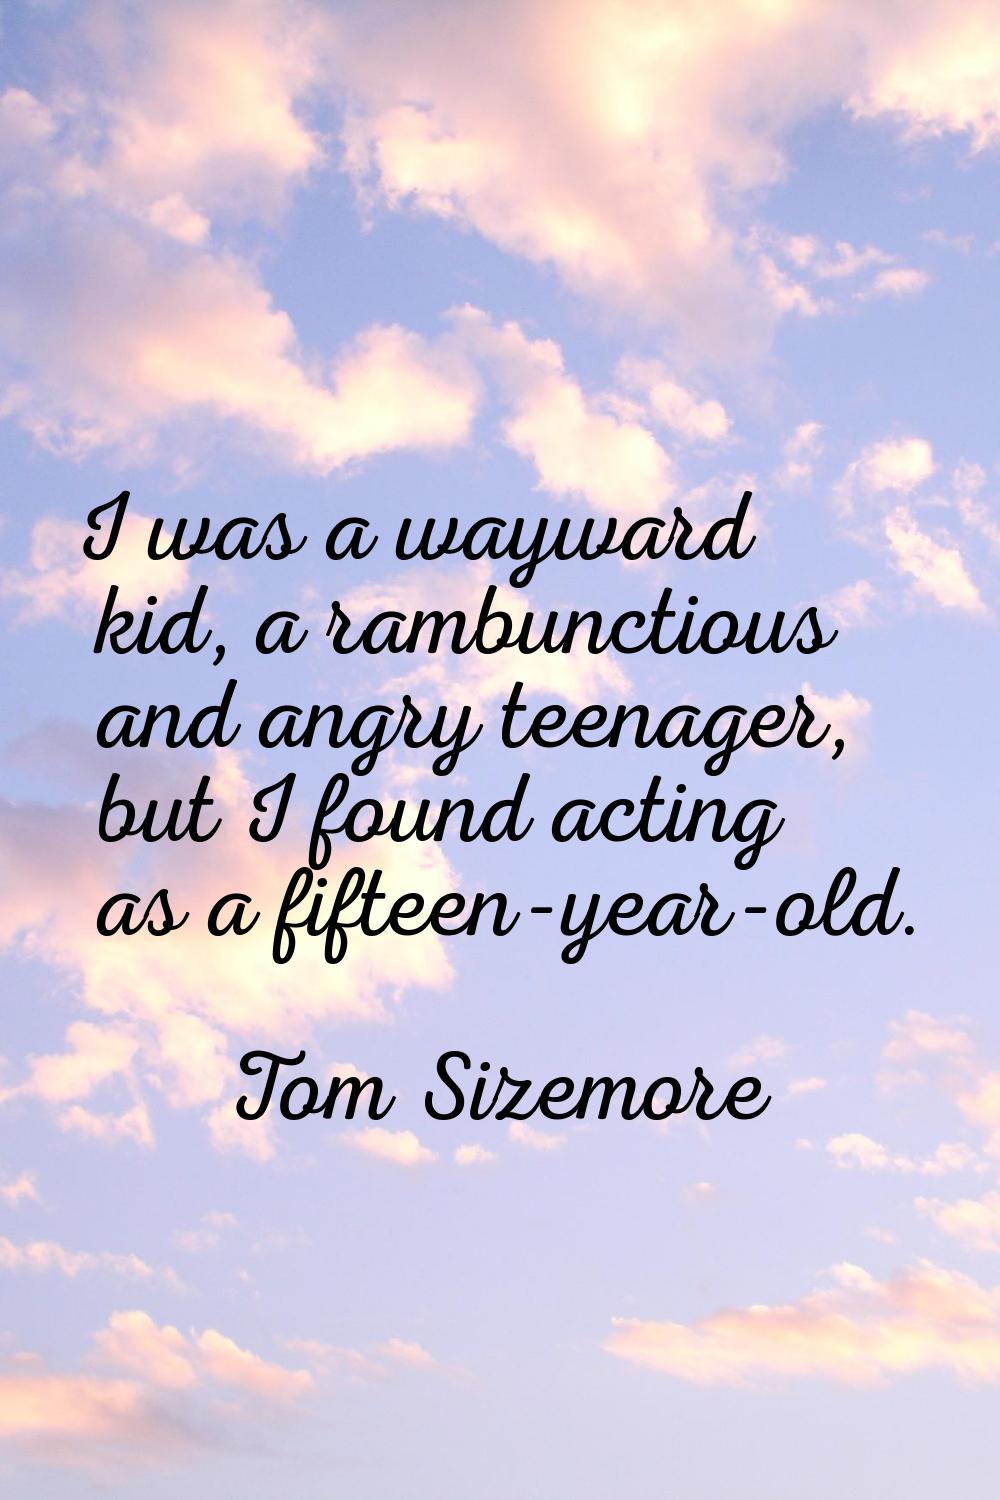 I was a wayward kid, a rambunctious and angry teenager, but I found acting as a fifteen-year-old.